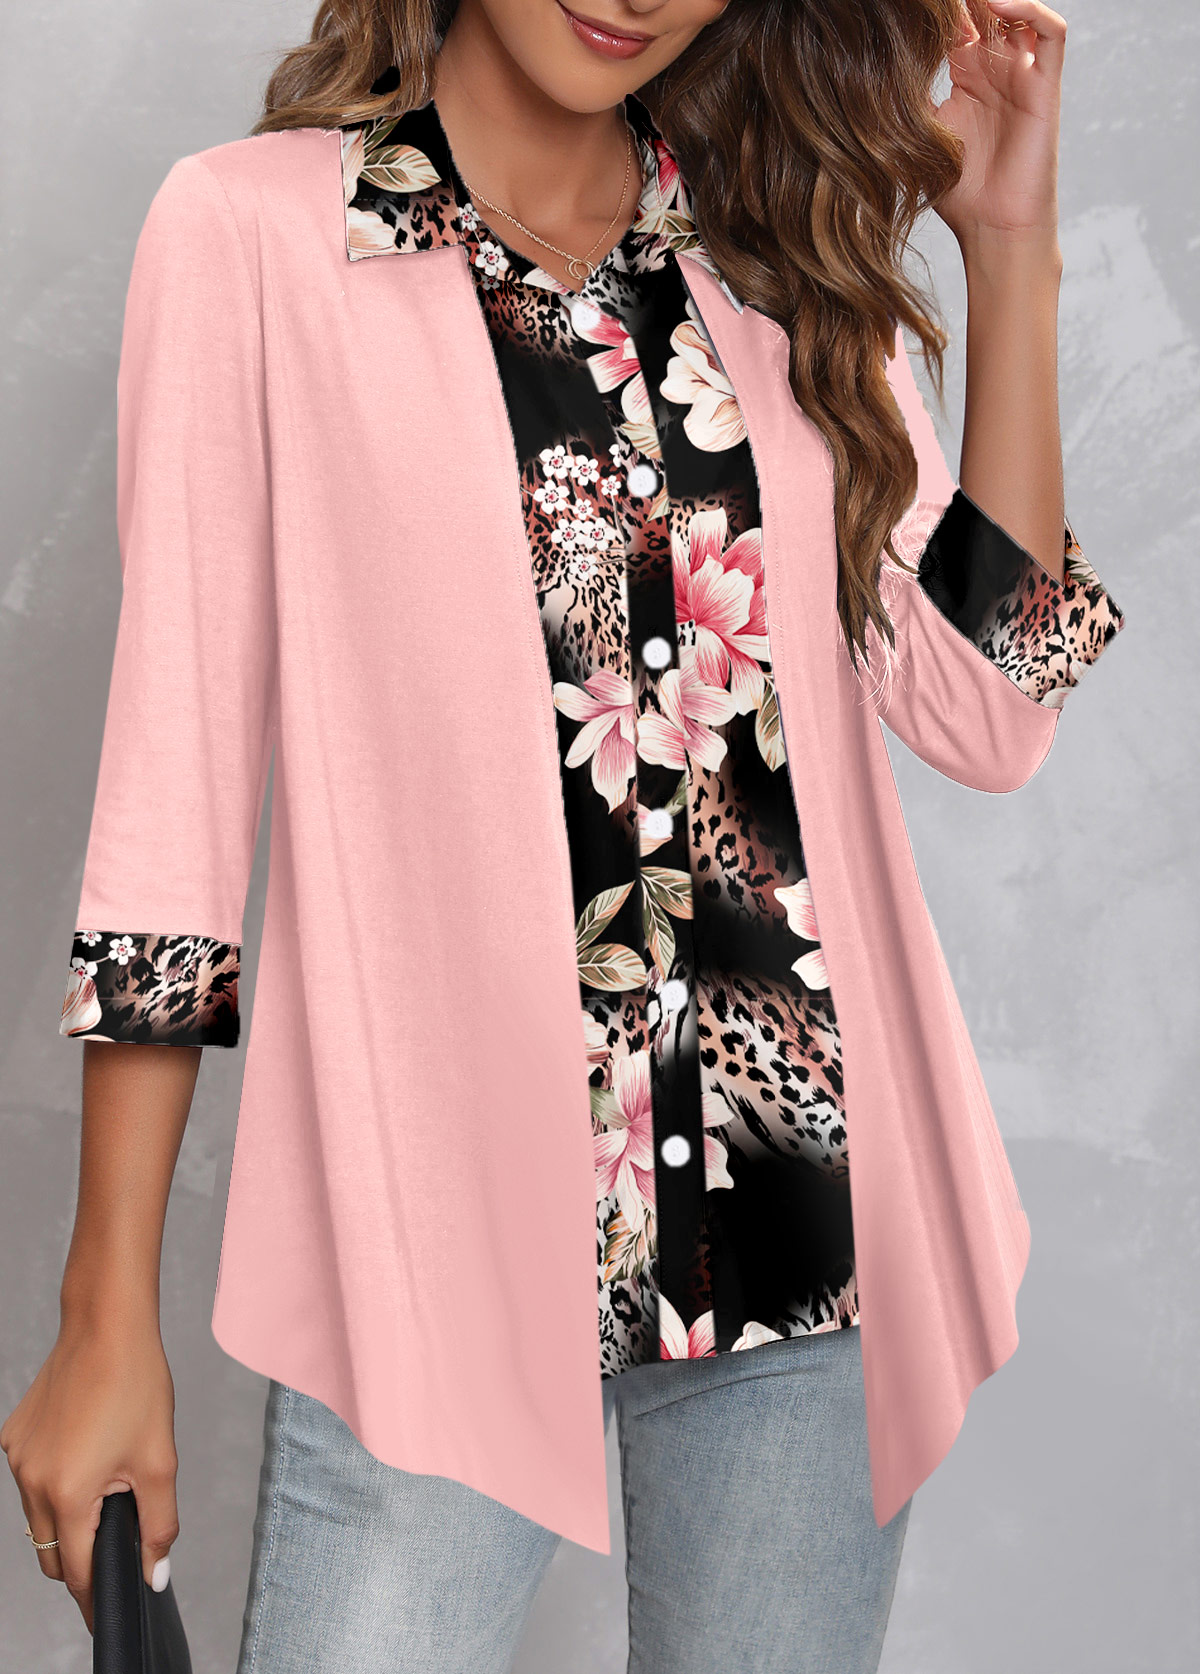 Floral Print Fake 2in1 Light Pink Blouse